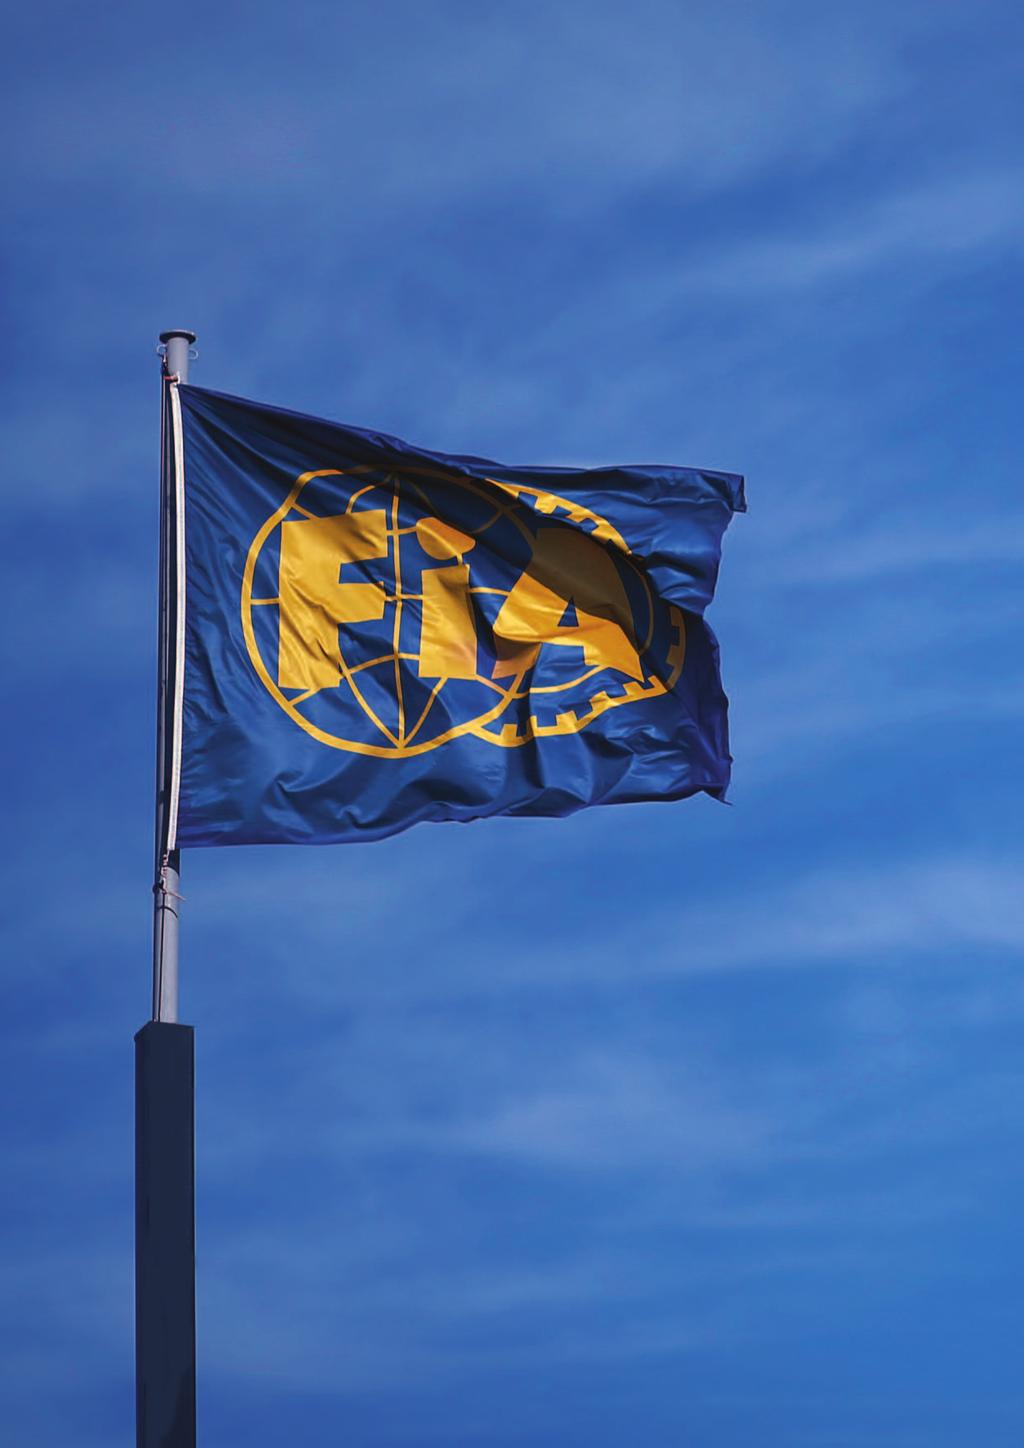 5 THE FIA FORMULA E CHAMPIONSHIP ABOUT THE CHAMPIONSHIP As the world s first fully-electric racing series, the FIA Formula E championship is a ground-breaking single-seater championship.